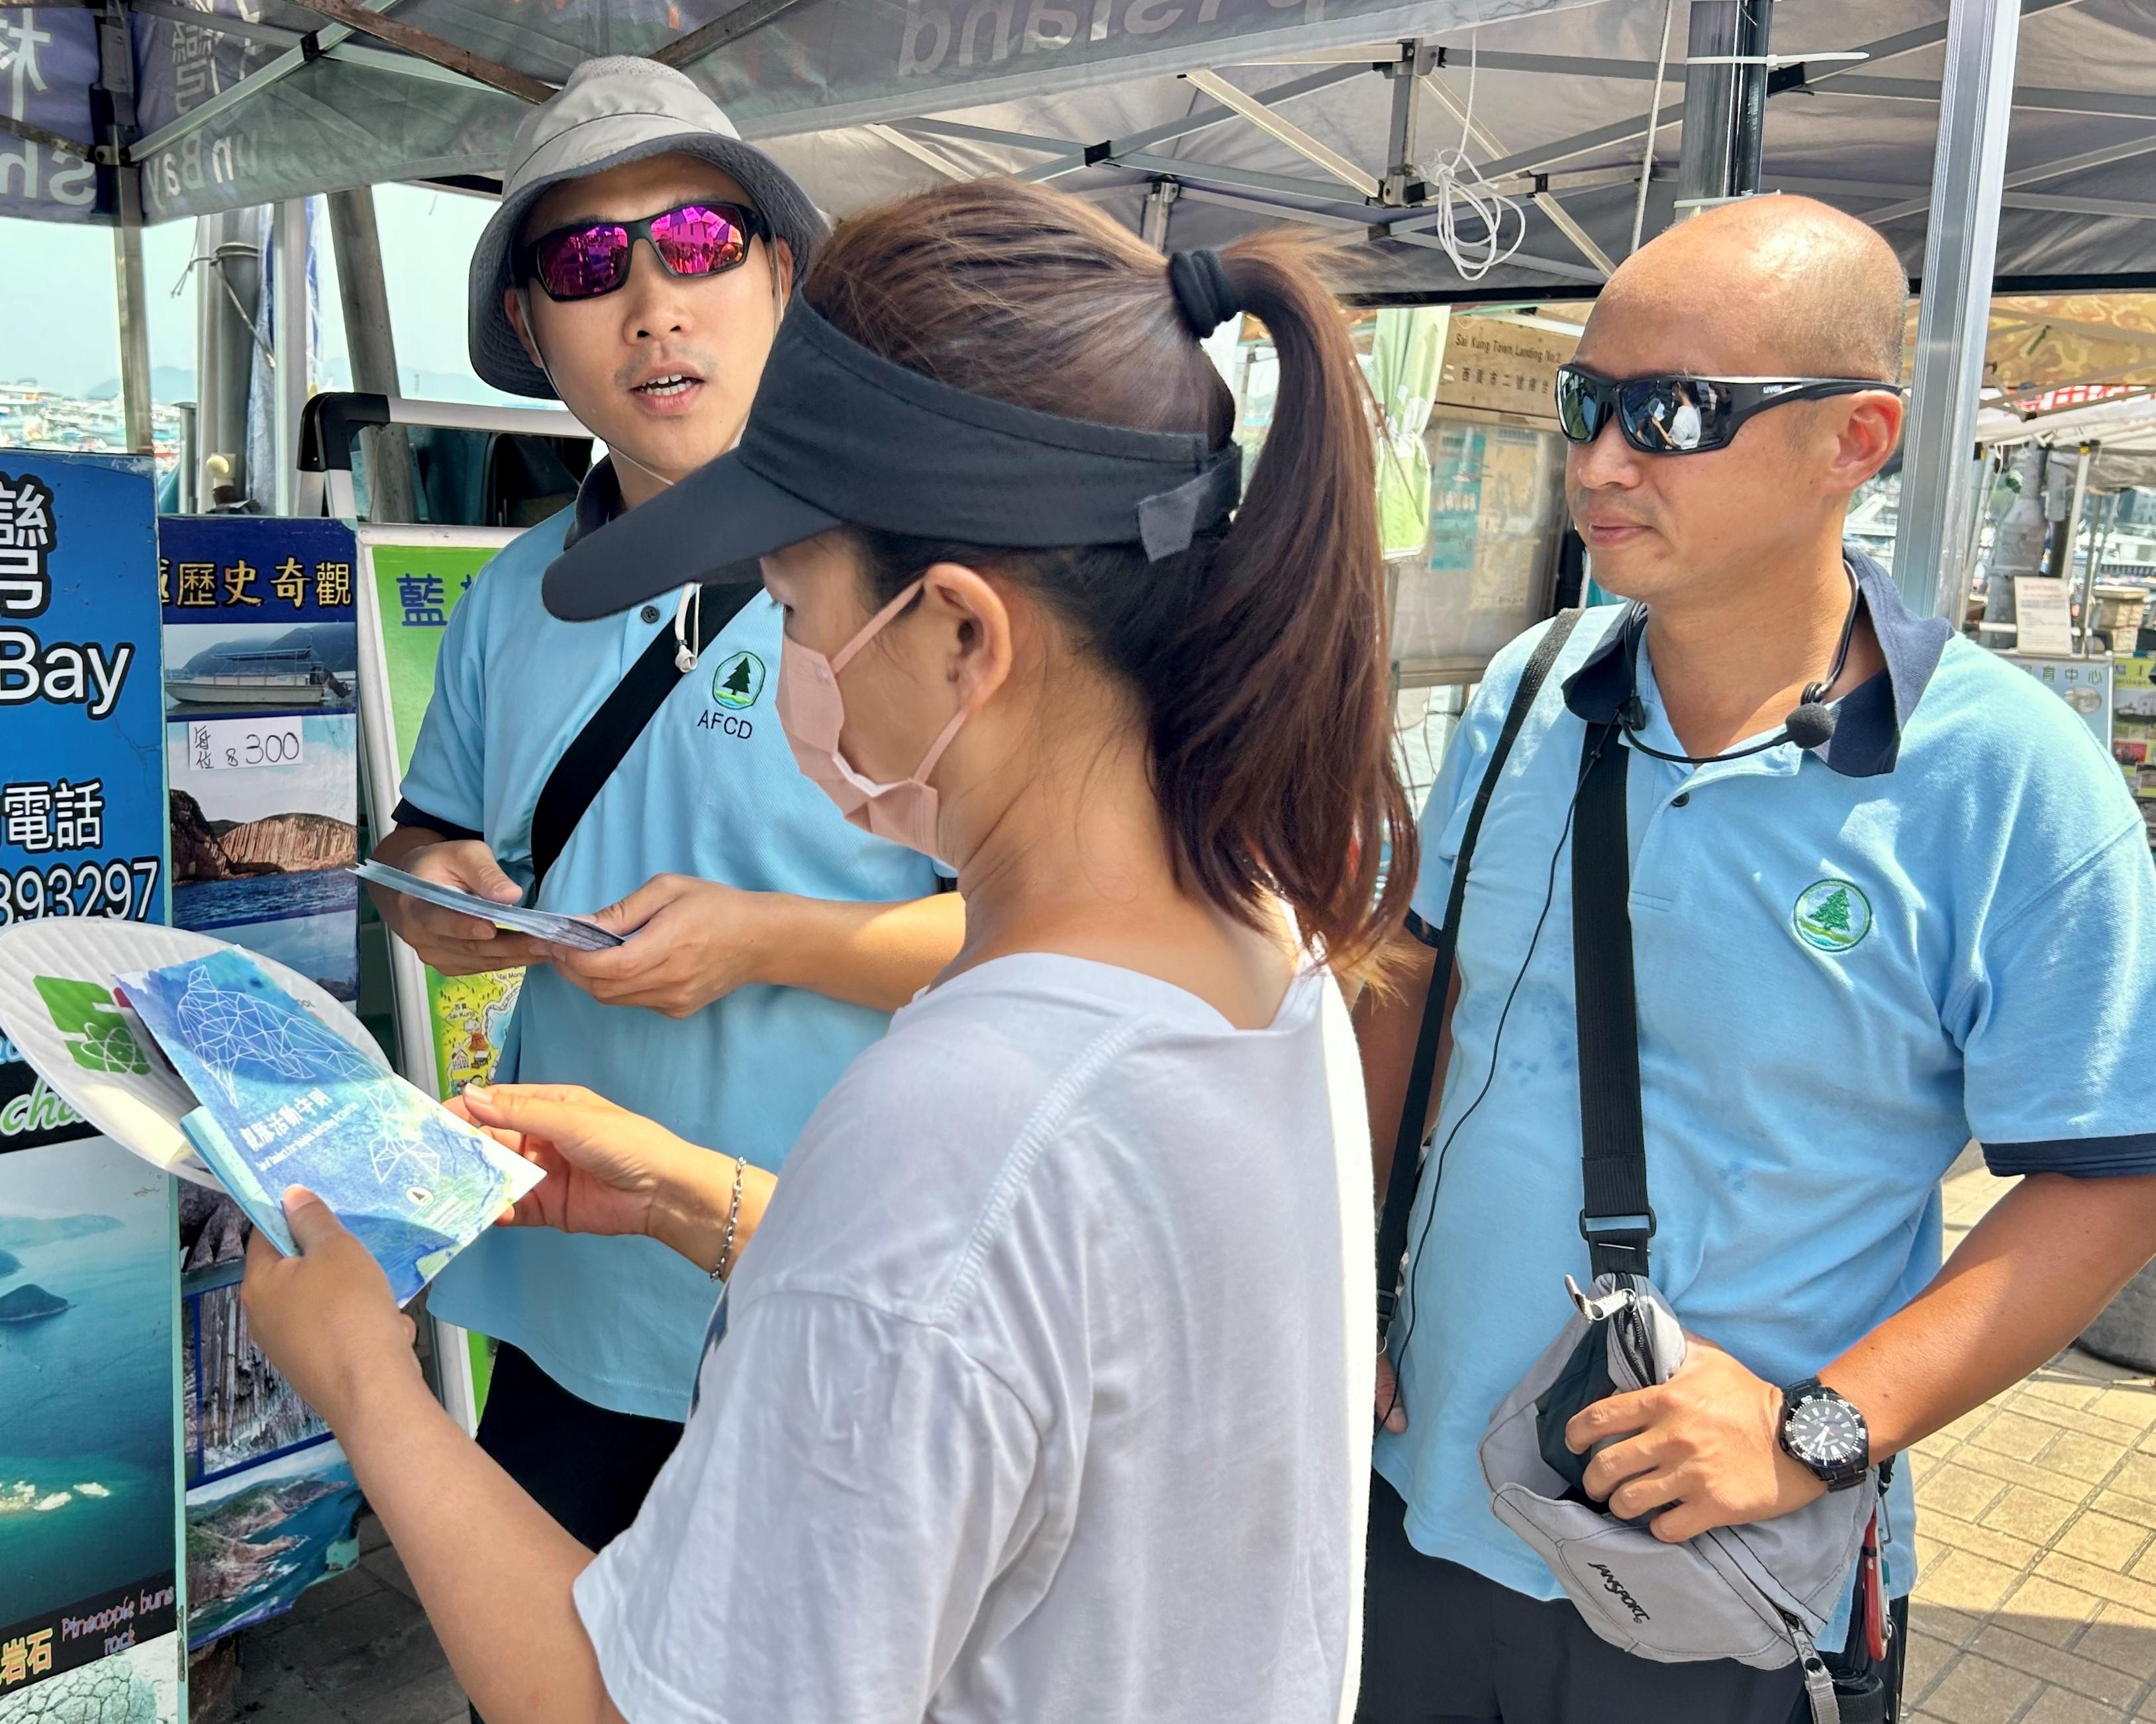 Regarding the recent sighting of a whale in Sai Kung waters, the Agriculture, Fisheries and Conservation Department (AFCD) today (July 26) strongly urges members of the public not to pursue the whale. Photo shows AFCD staff distributing leaflets to remind the public of the things to note upon sighting of whales.